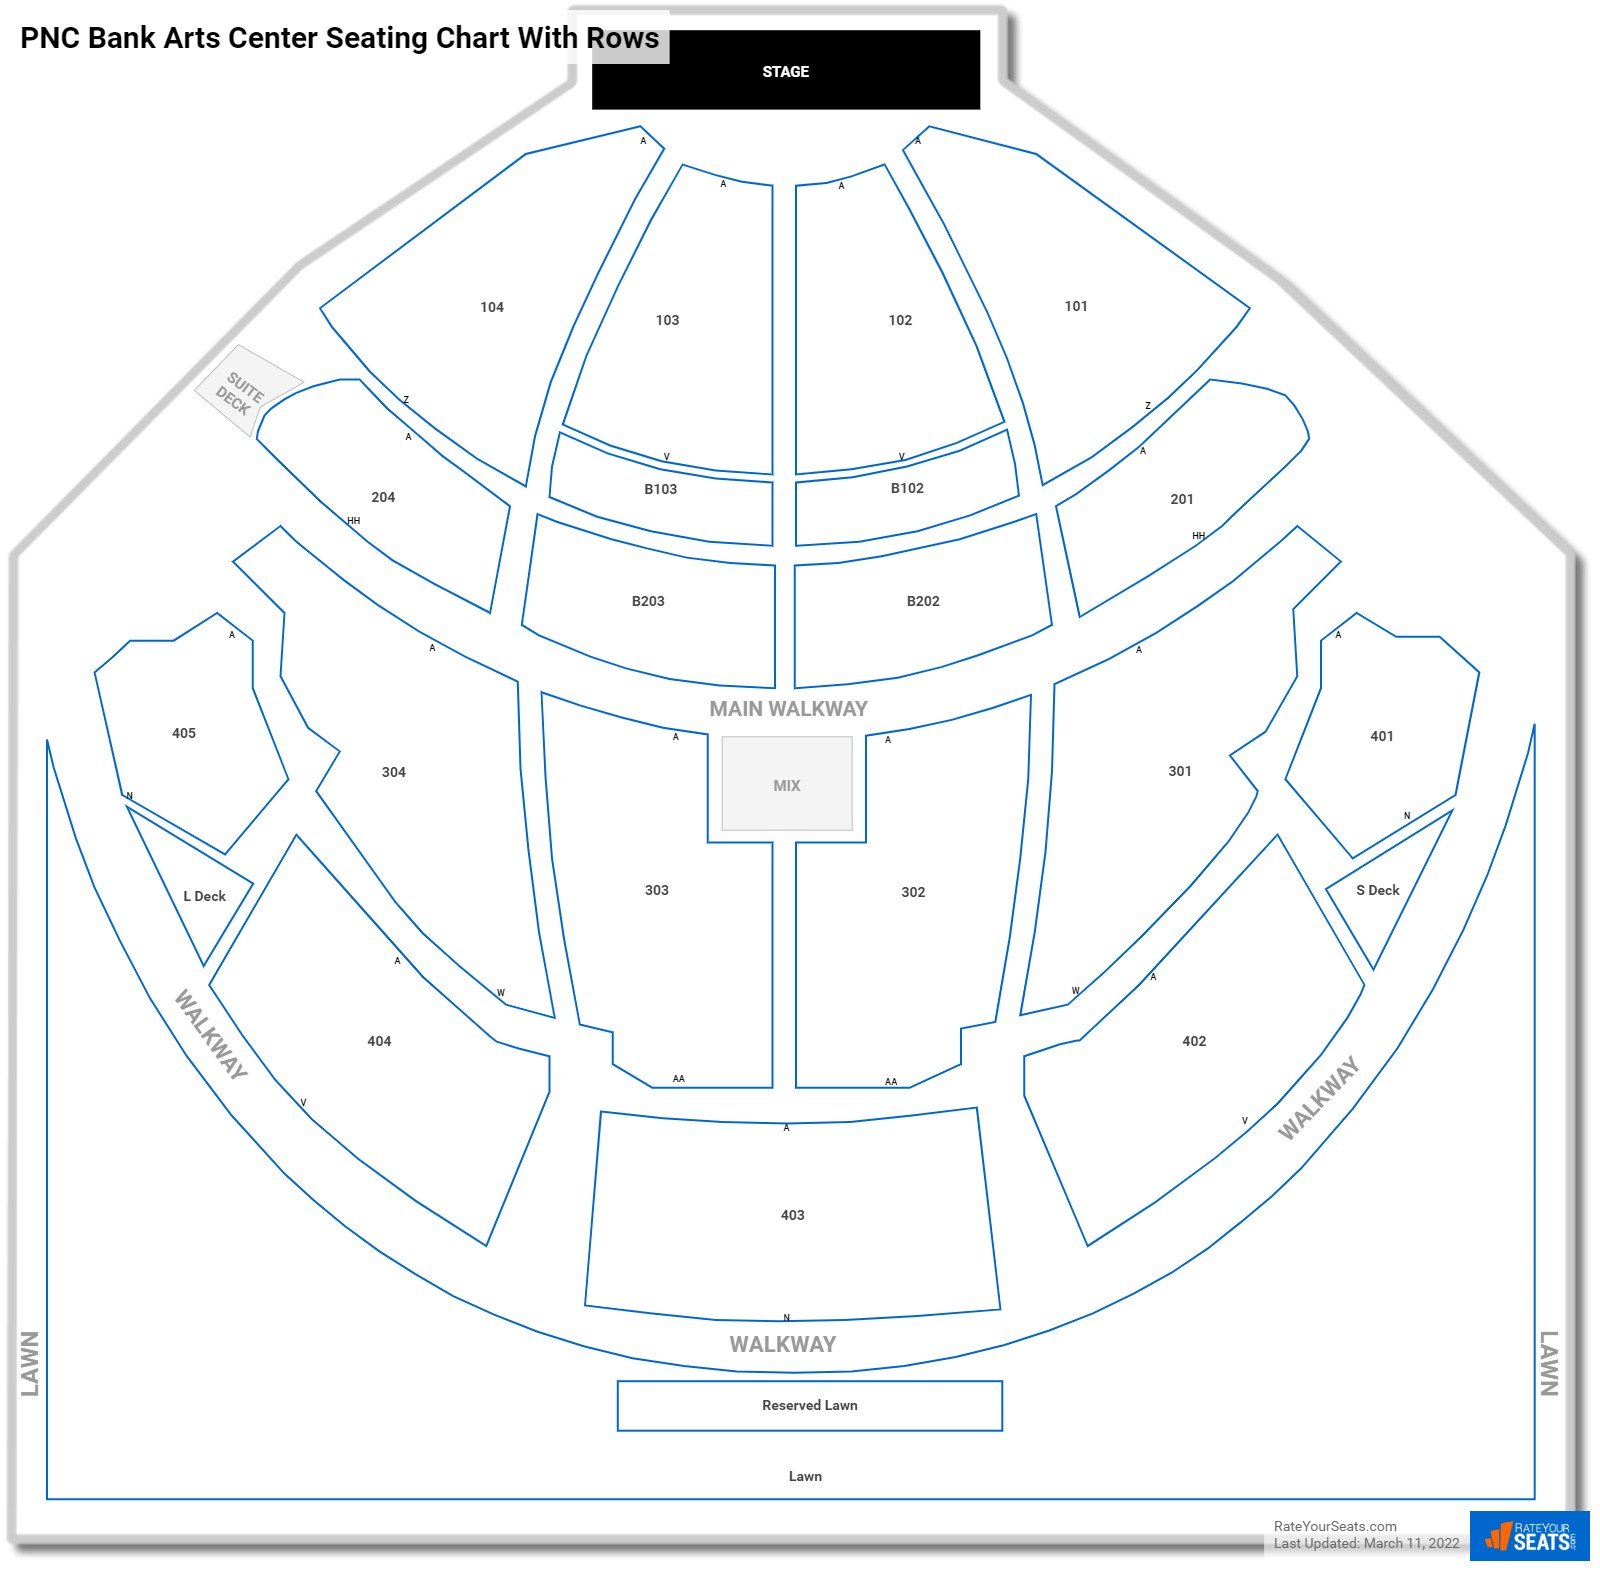 PNC Bank Arts Center seating chart with row numbers